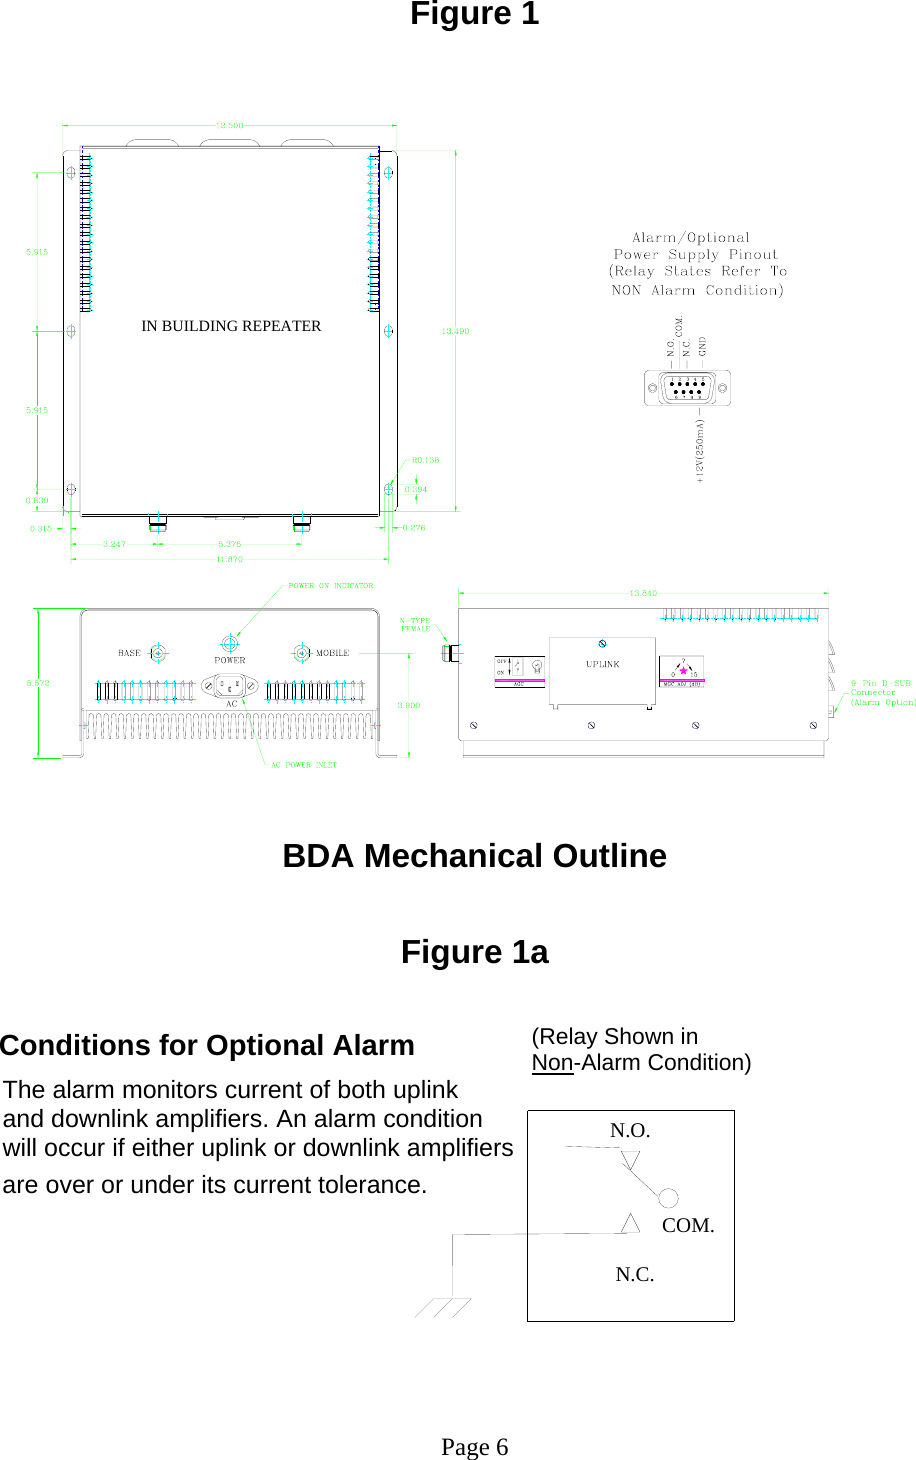              N.O.                                                          COM.                         N.C. IN BUILDING REPEATERFigure 1           BDA Mechanical Outline   Figure 1a    (Relay Shown in         Non-Alarm Condition) The alarm monitors current of both uplink and downlink amplifiers. An alarm condition                                                             will occur if either uplink or downlink amplifiers                                               are over or under its current tolerance.                                                                                             Page 6 Conditions for Optional Alarm 